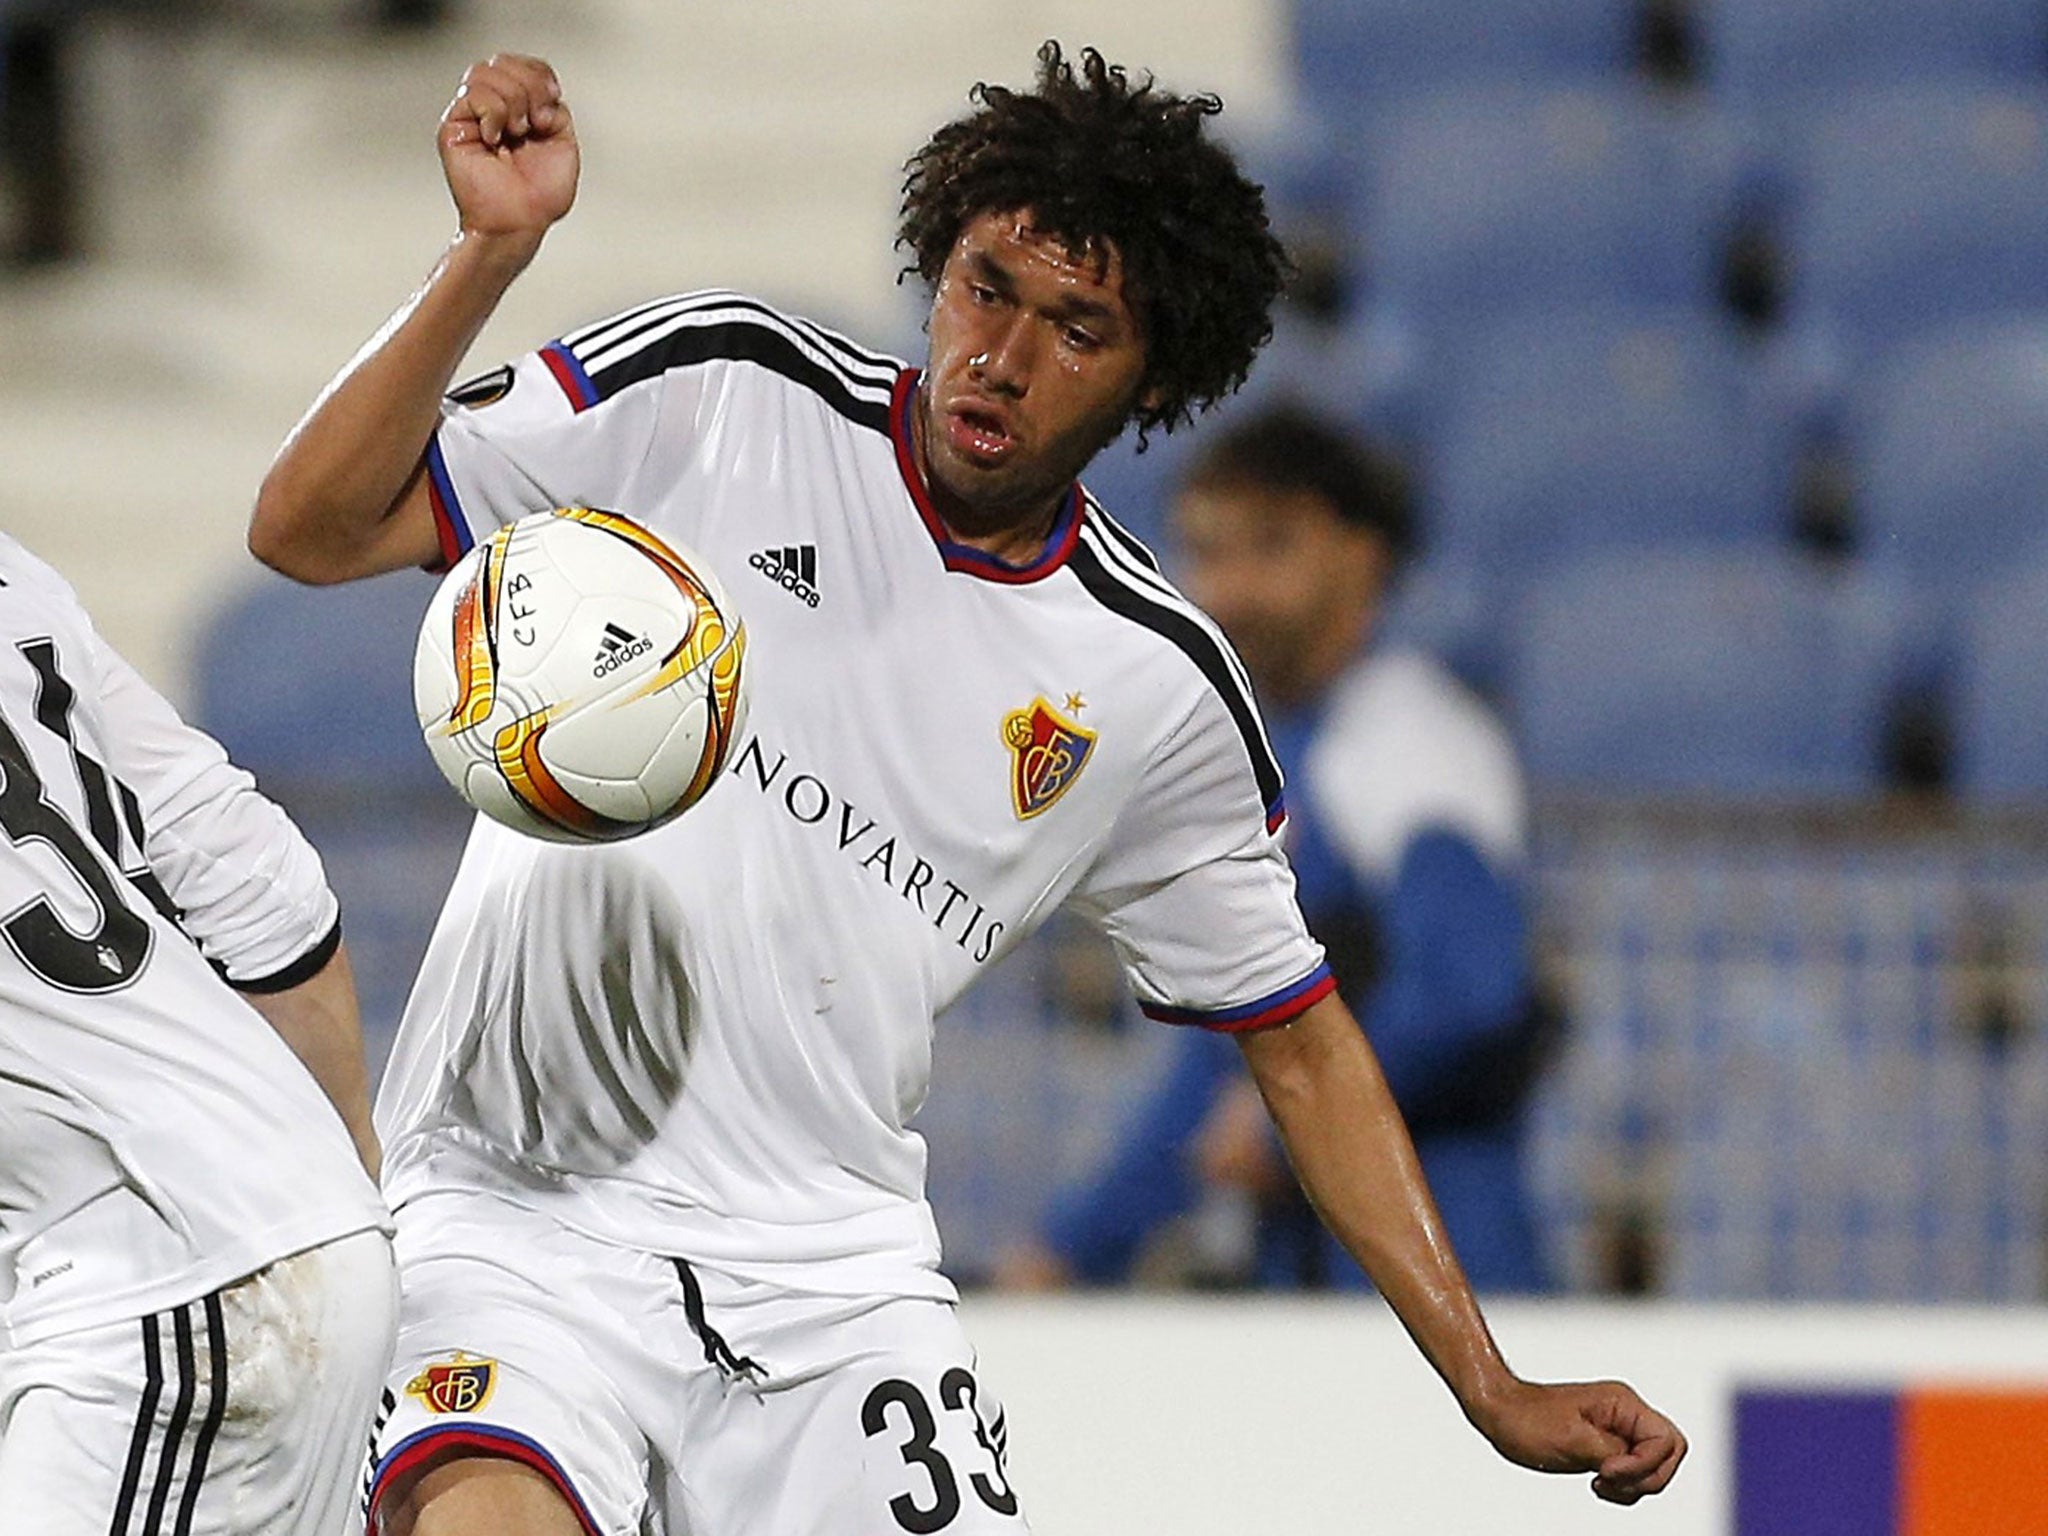 Mohamed Elneny is set to complete a move to Arsenal